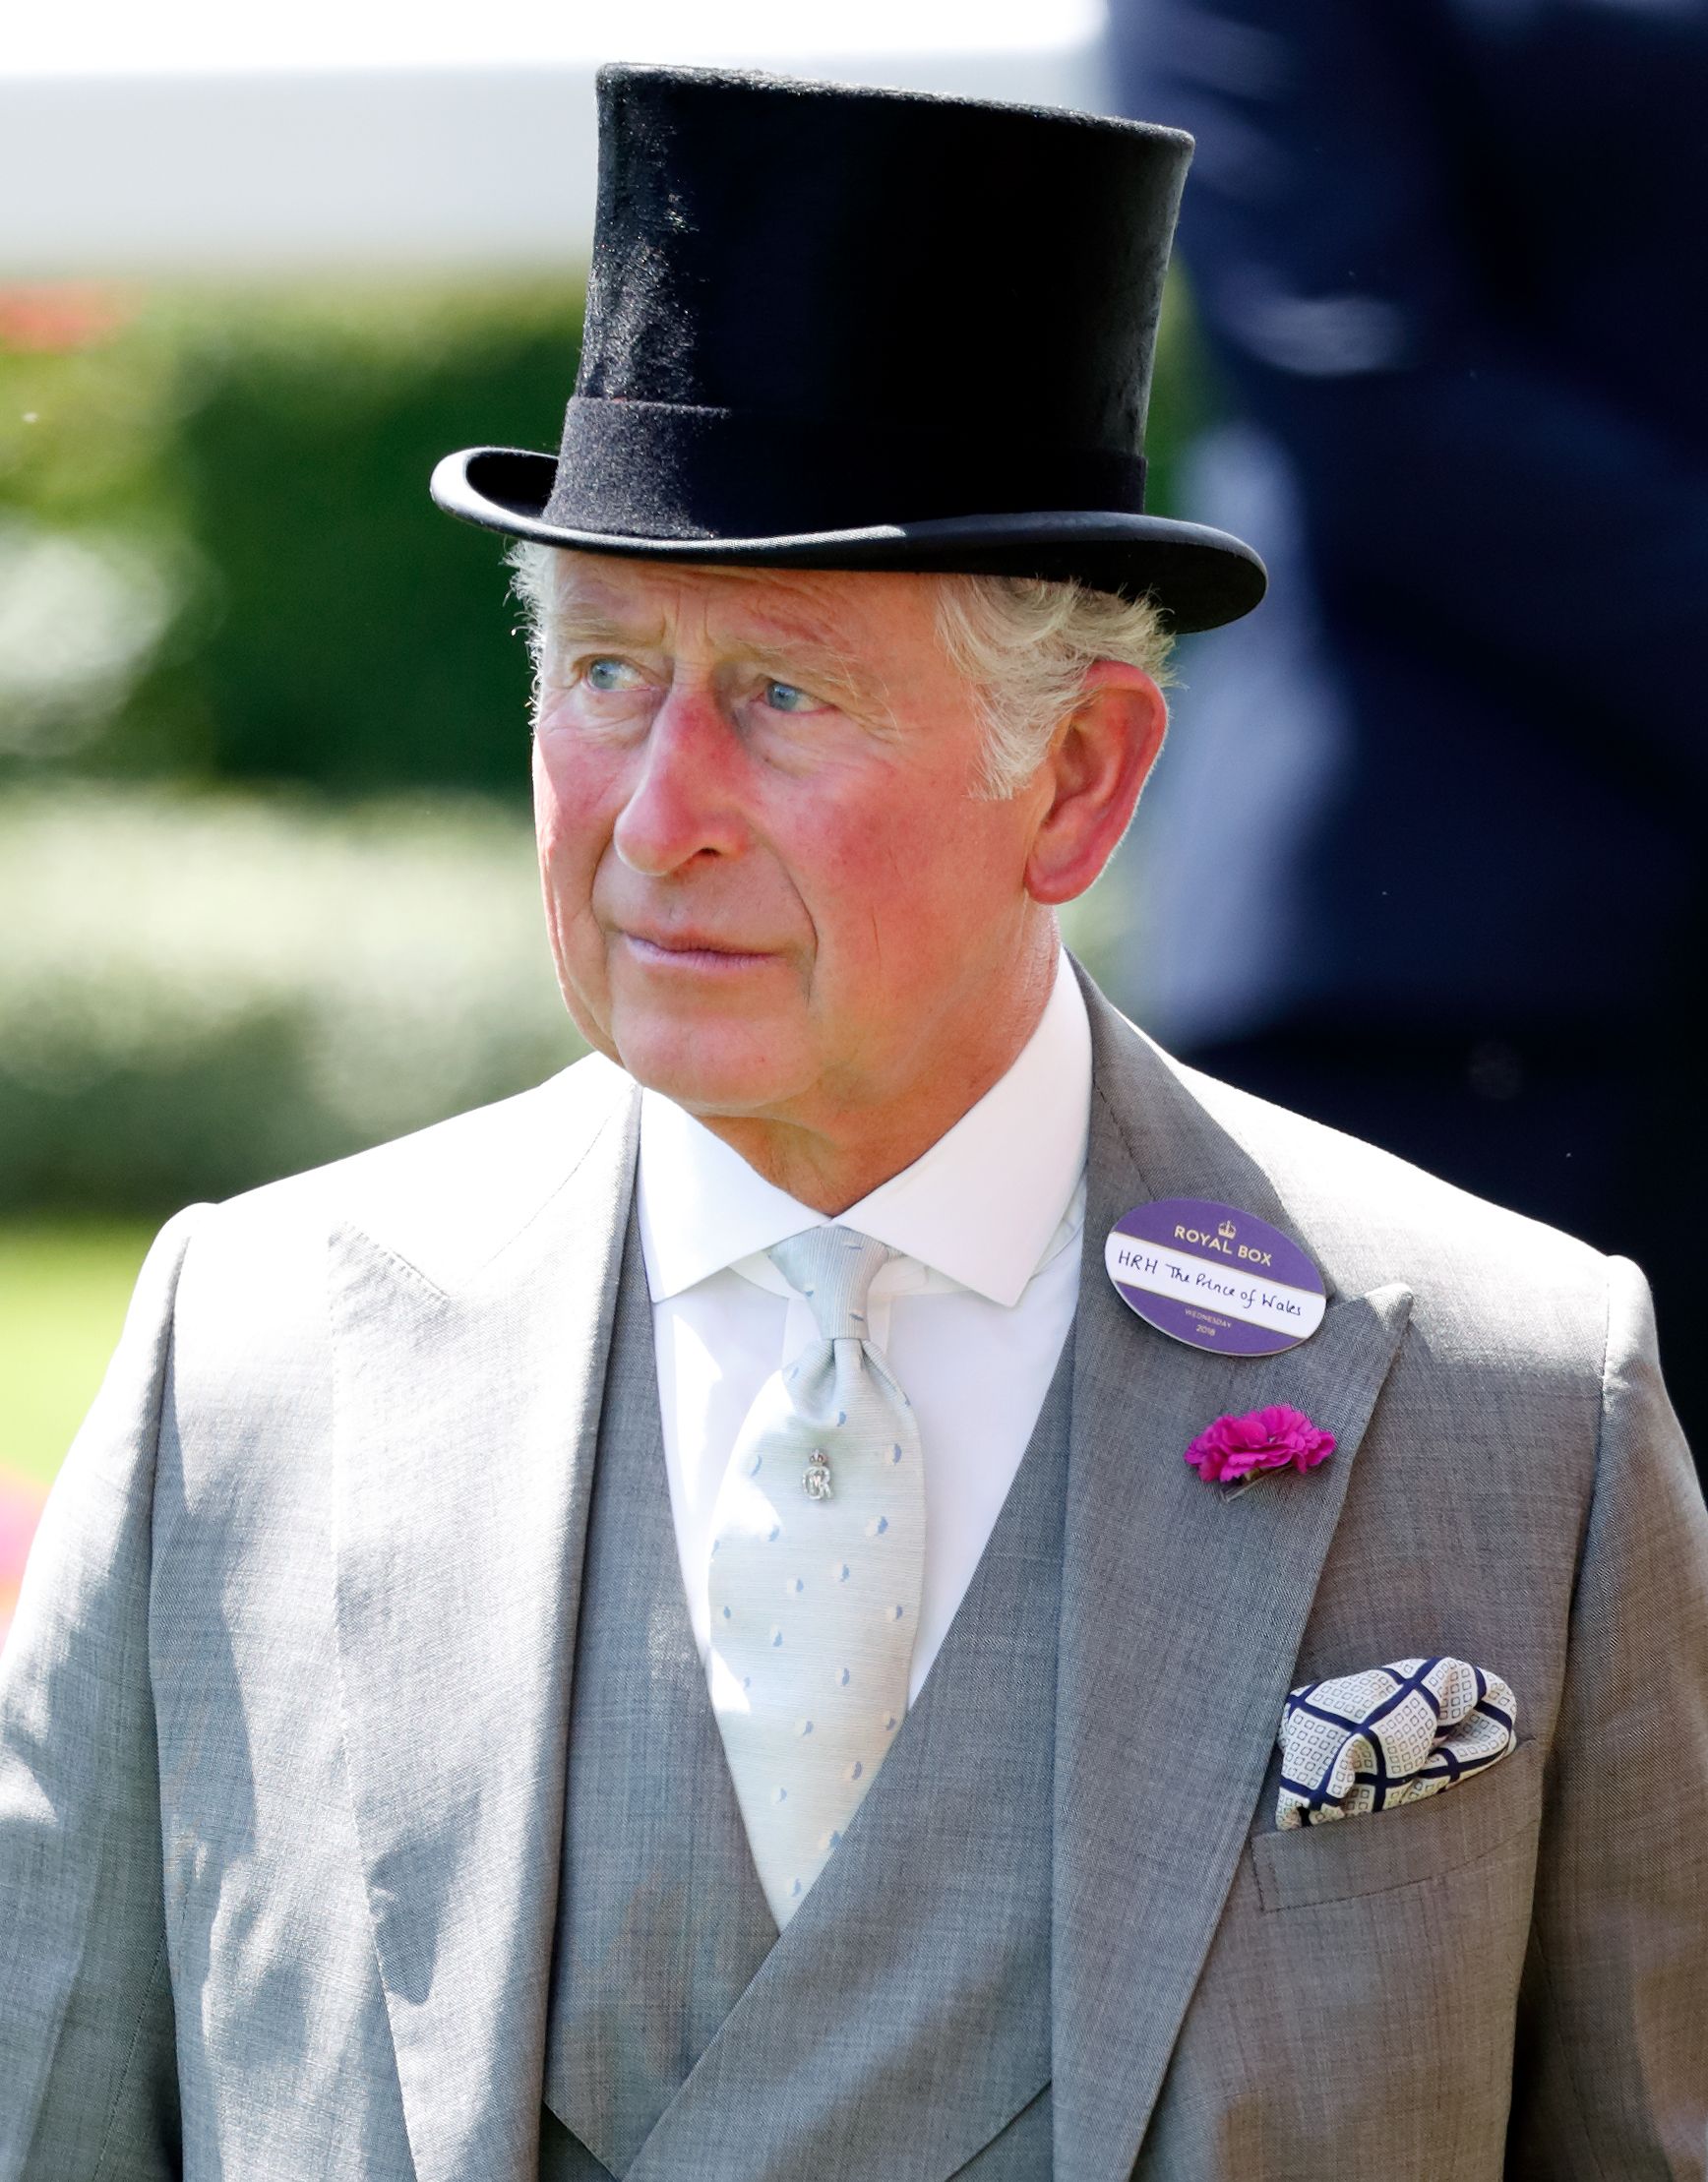 Prince Charles, Prince of Wales attends day 2 of Royal Ascot at Ascot Racecourse on June 20, 2018 | Getty Images